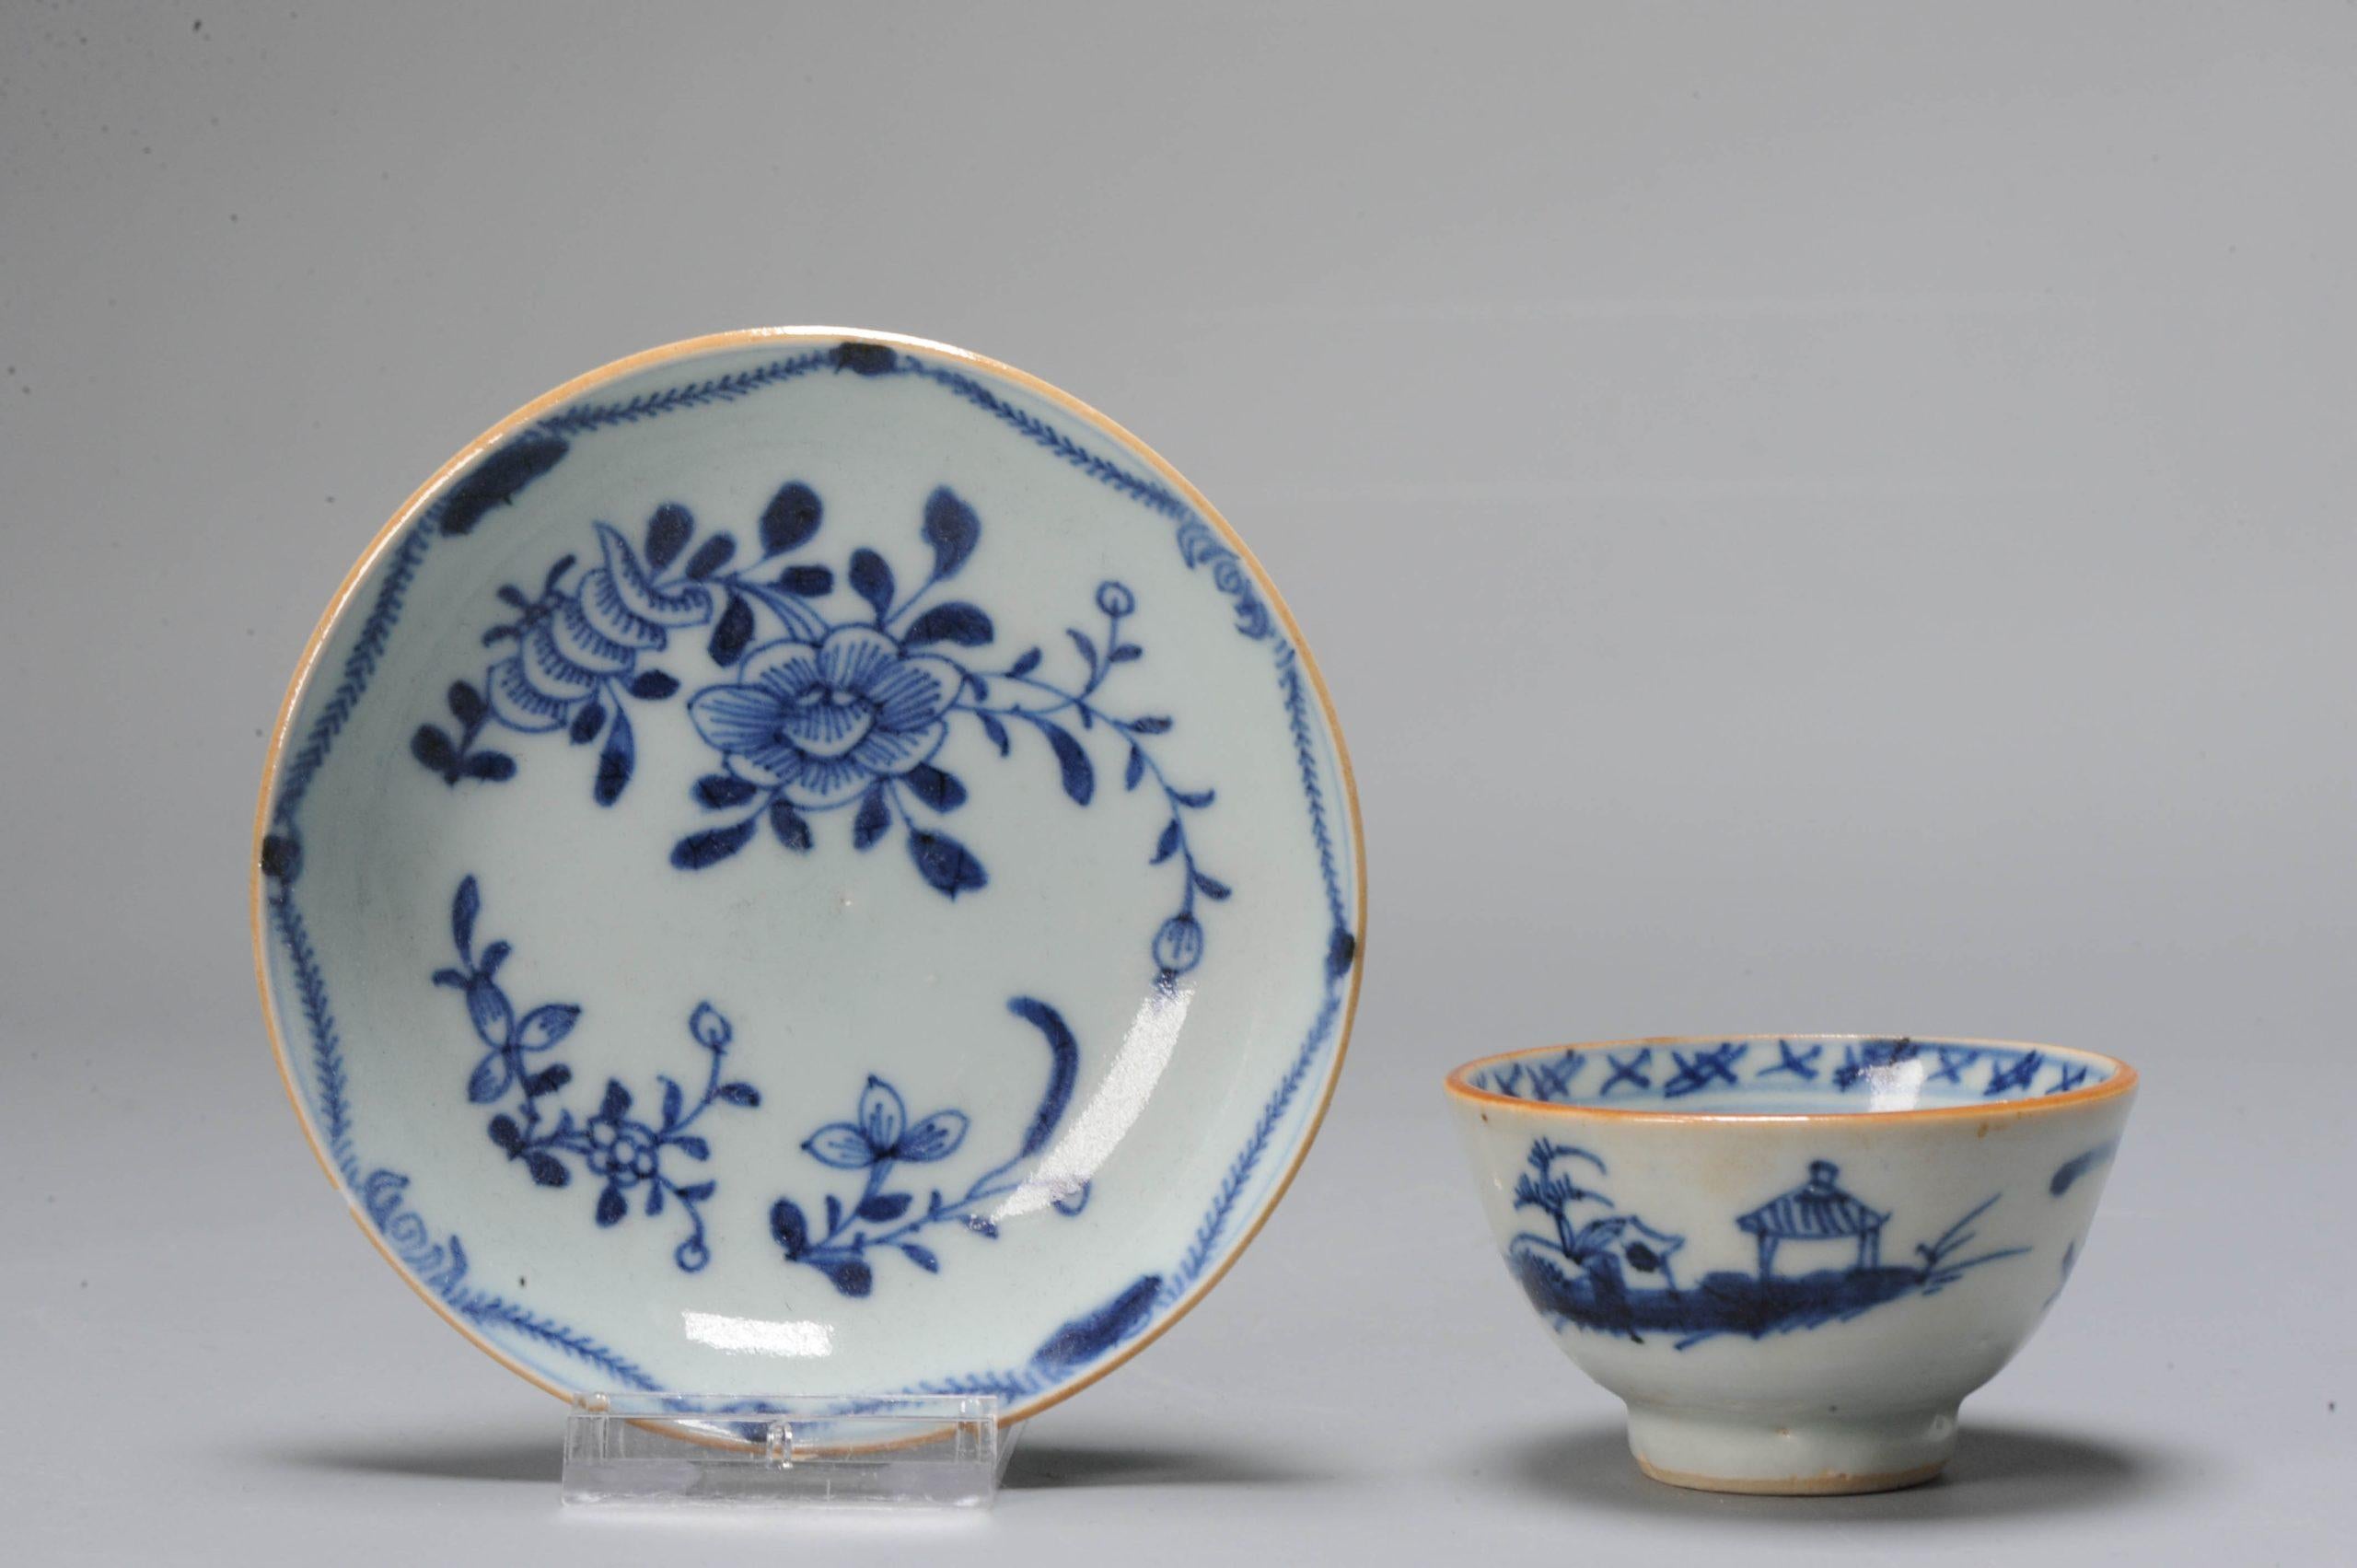 Lovely tea bowl and dish. Its a marriage, combination of 2 sets.

Additional information:
Material: Porcelain & Pottery
Type: Plates
Region of Origin: China
Period: 18th century Qing (1661 - 1912)
Emperor: Kangxi (1661-1722)
Age: Pre-1800
Condition: